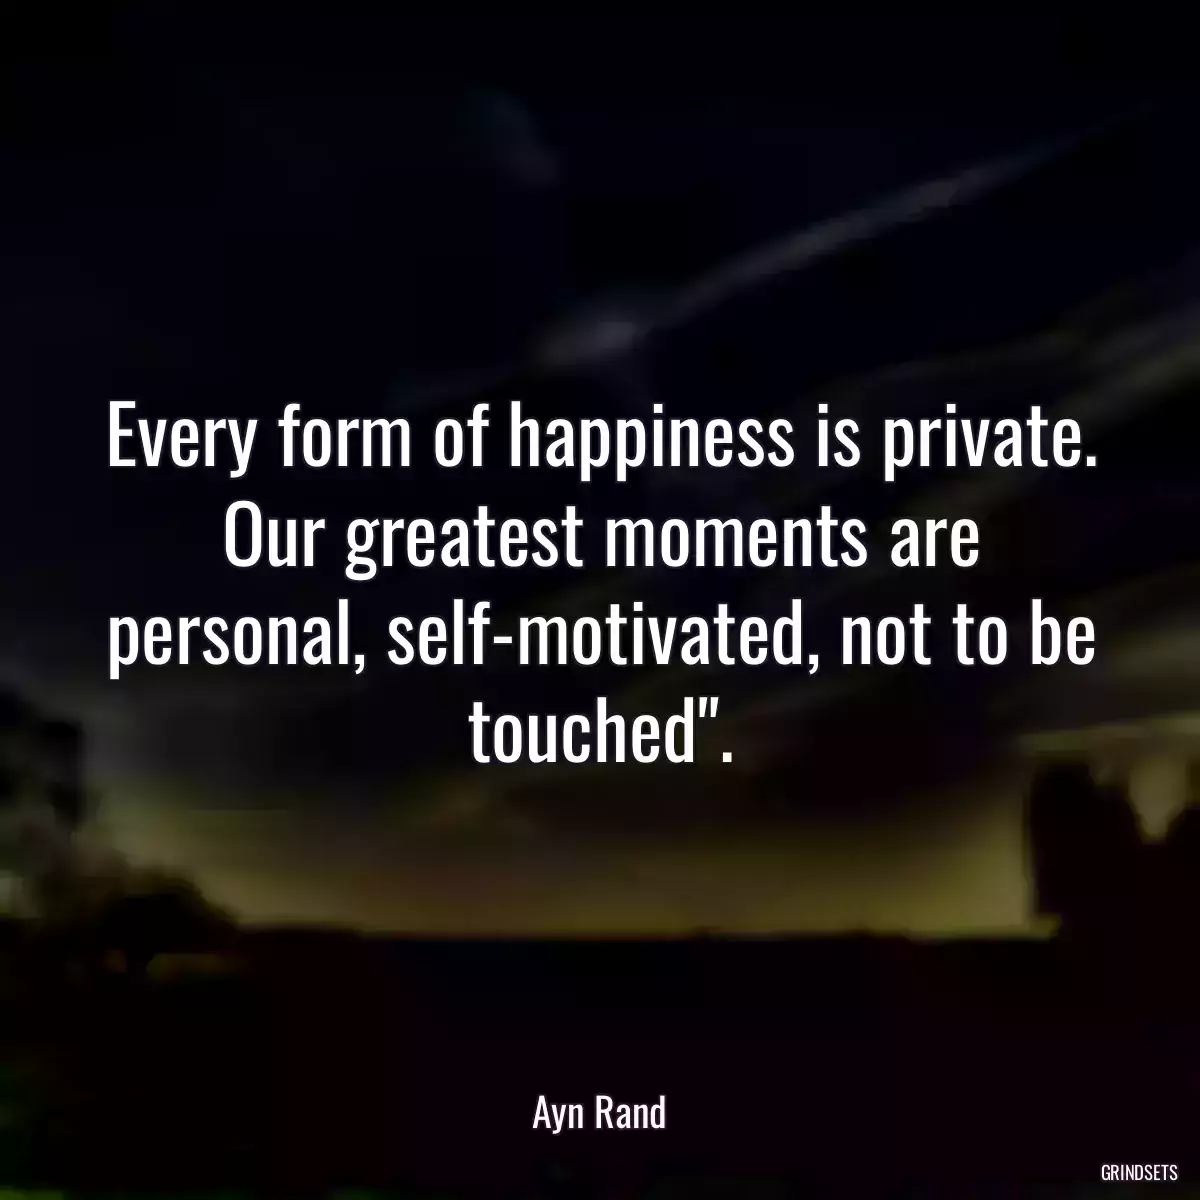 Every form of happiness is private. Our greatest moments are personal, self-motivated, not to be touched\